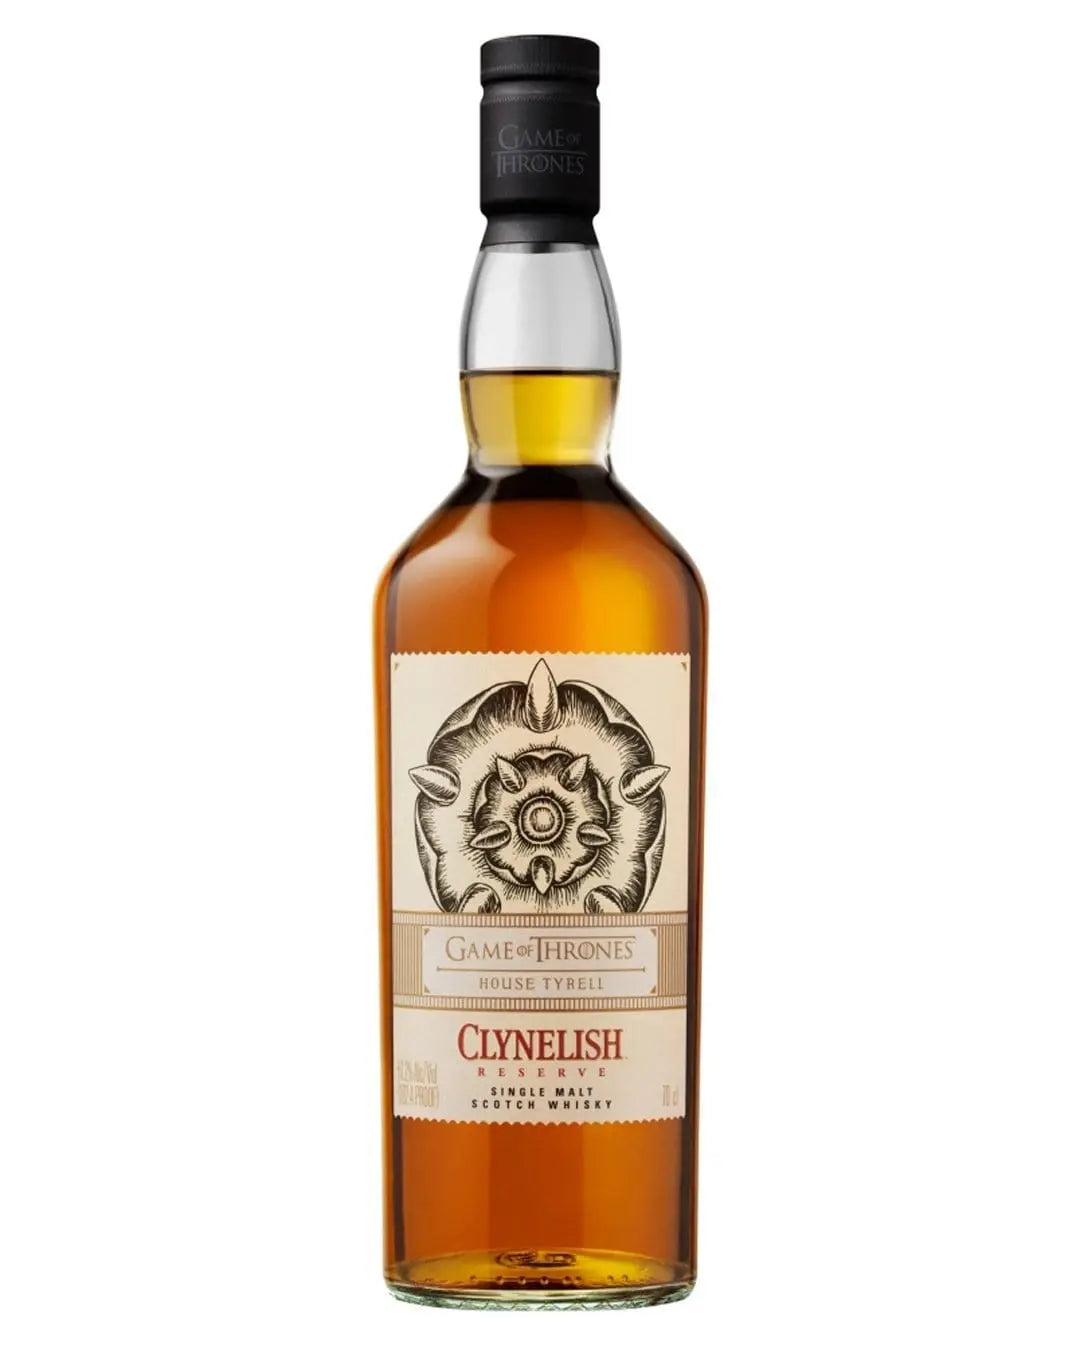 Game of Thrones House Tyrell - Clynelish Reserve Malt Whisky, 70 cl Whisky 5000267173733